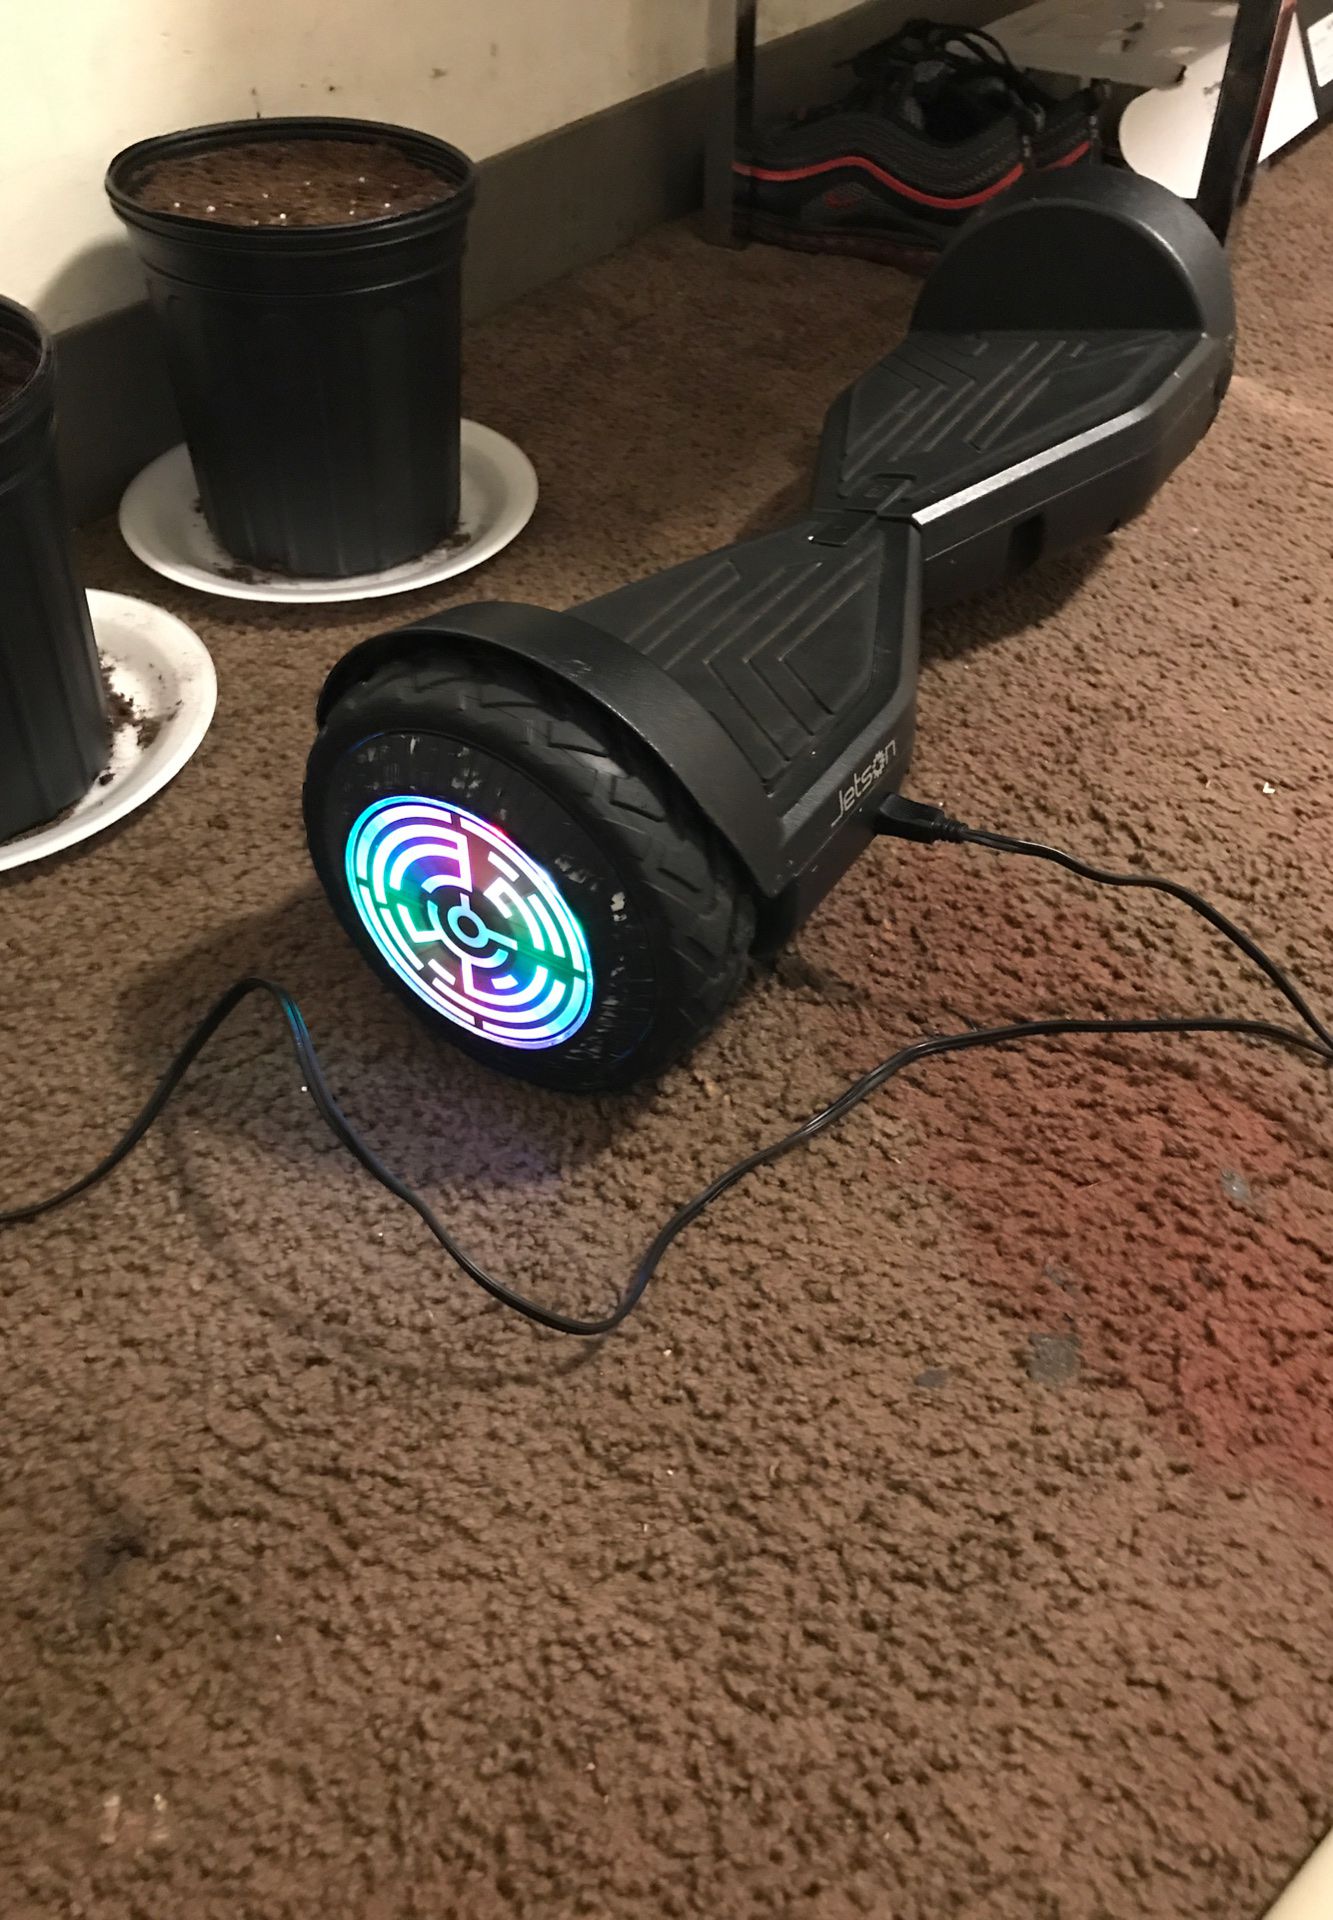 Jetson hoverboard